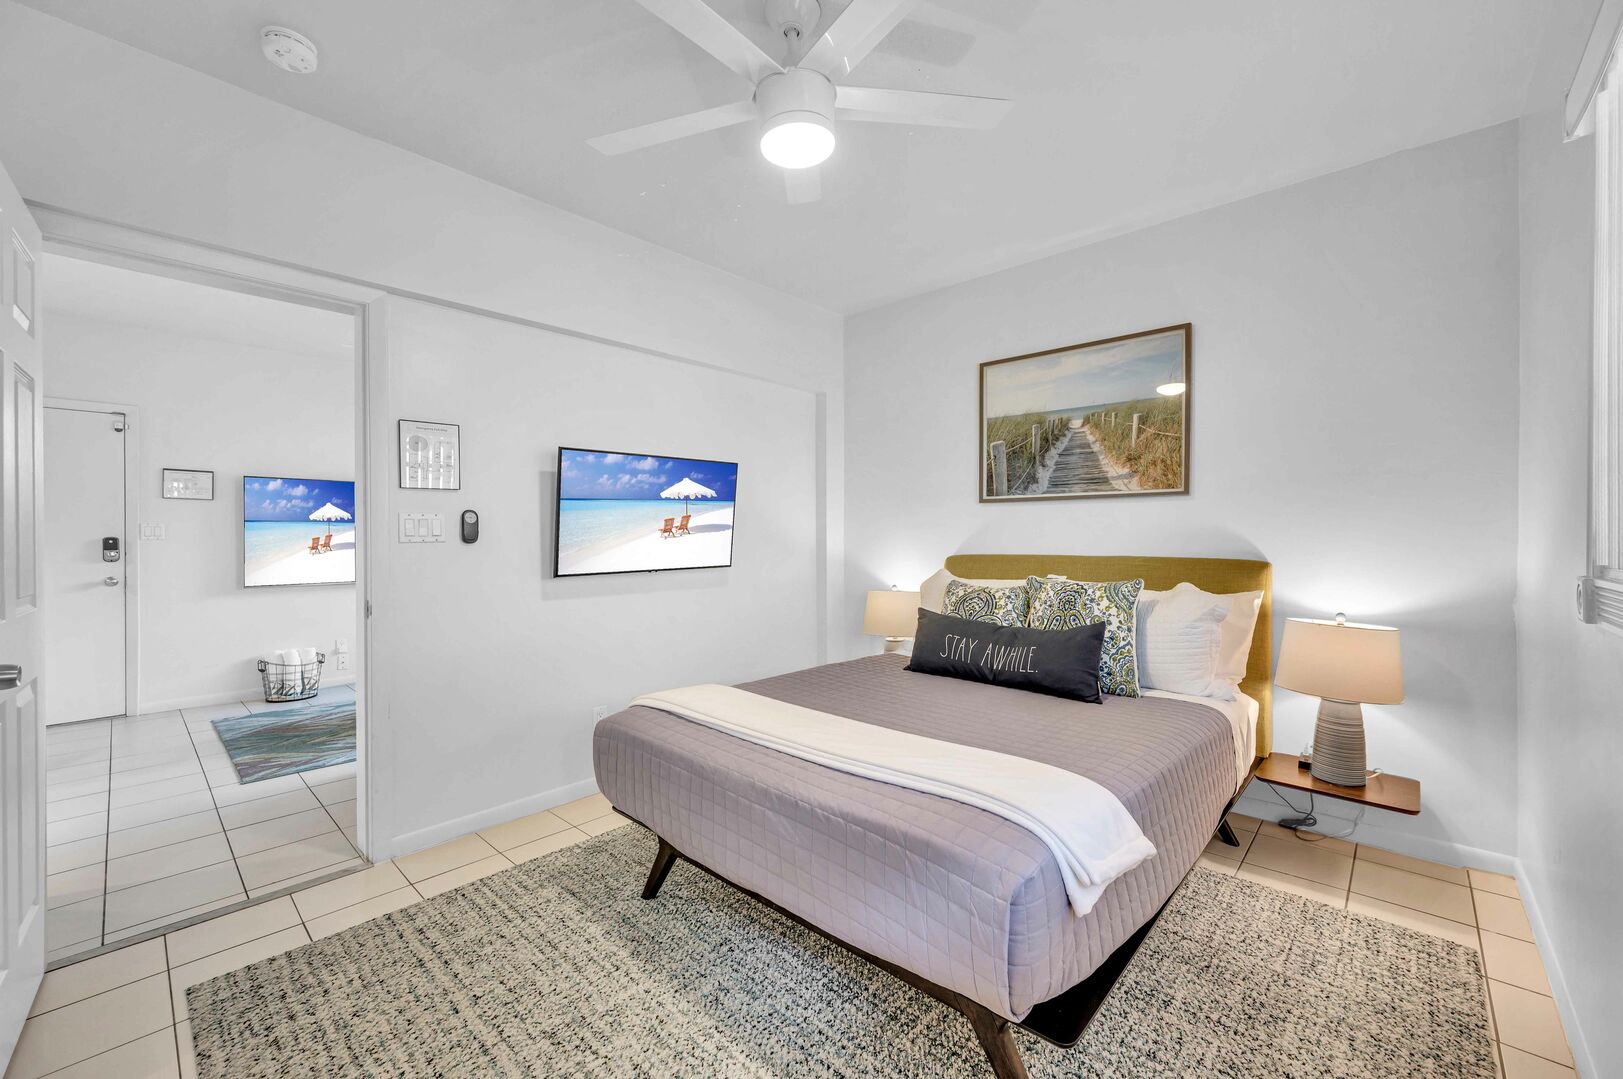 The bedroom features a queen-sized bed and a wall-mounted Smart TV.